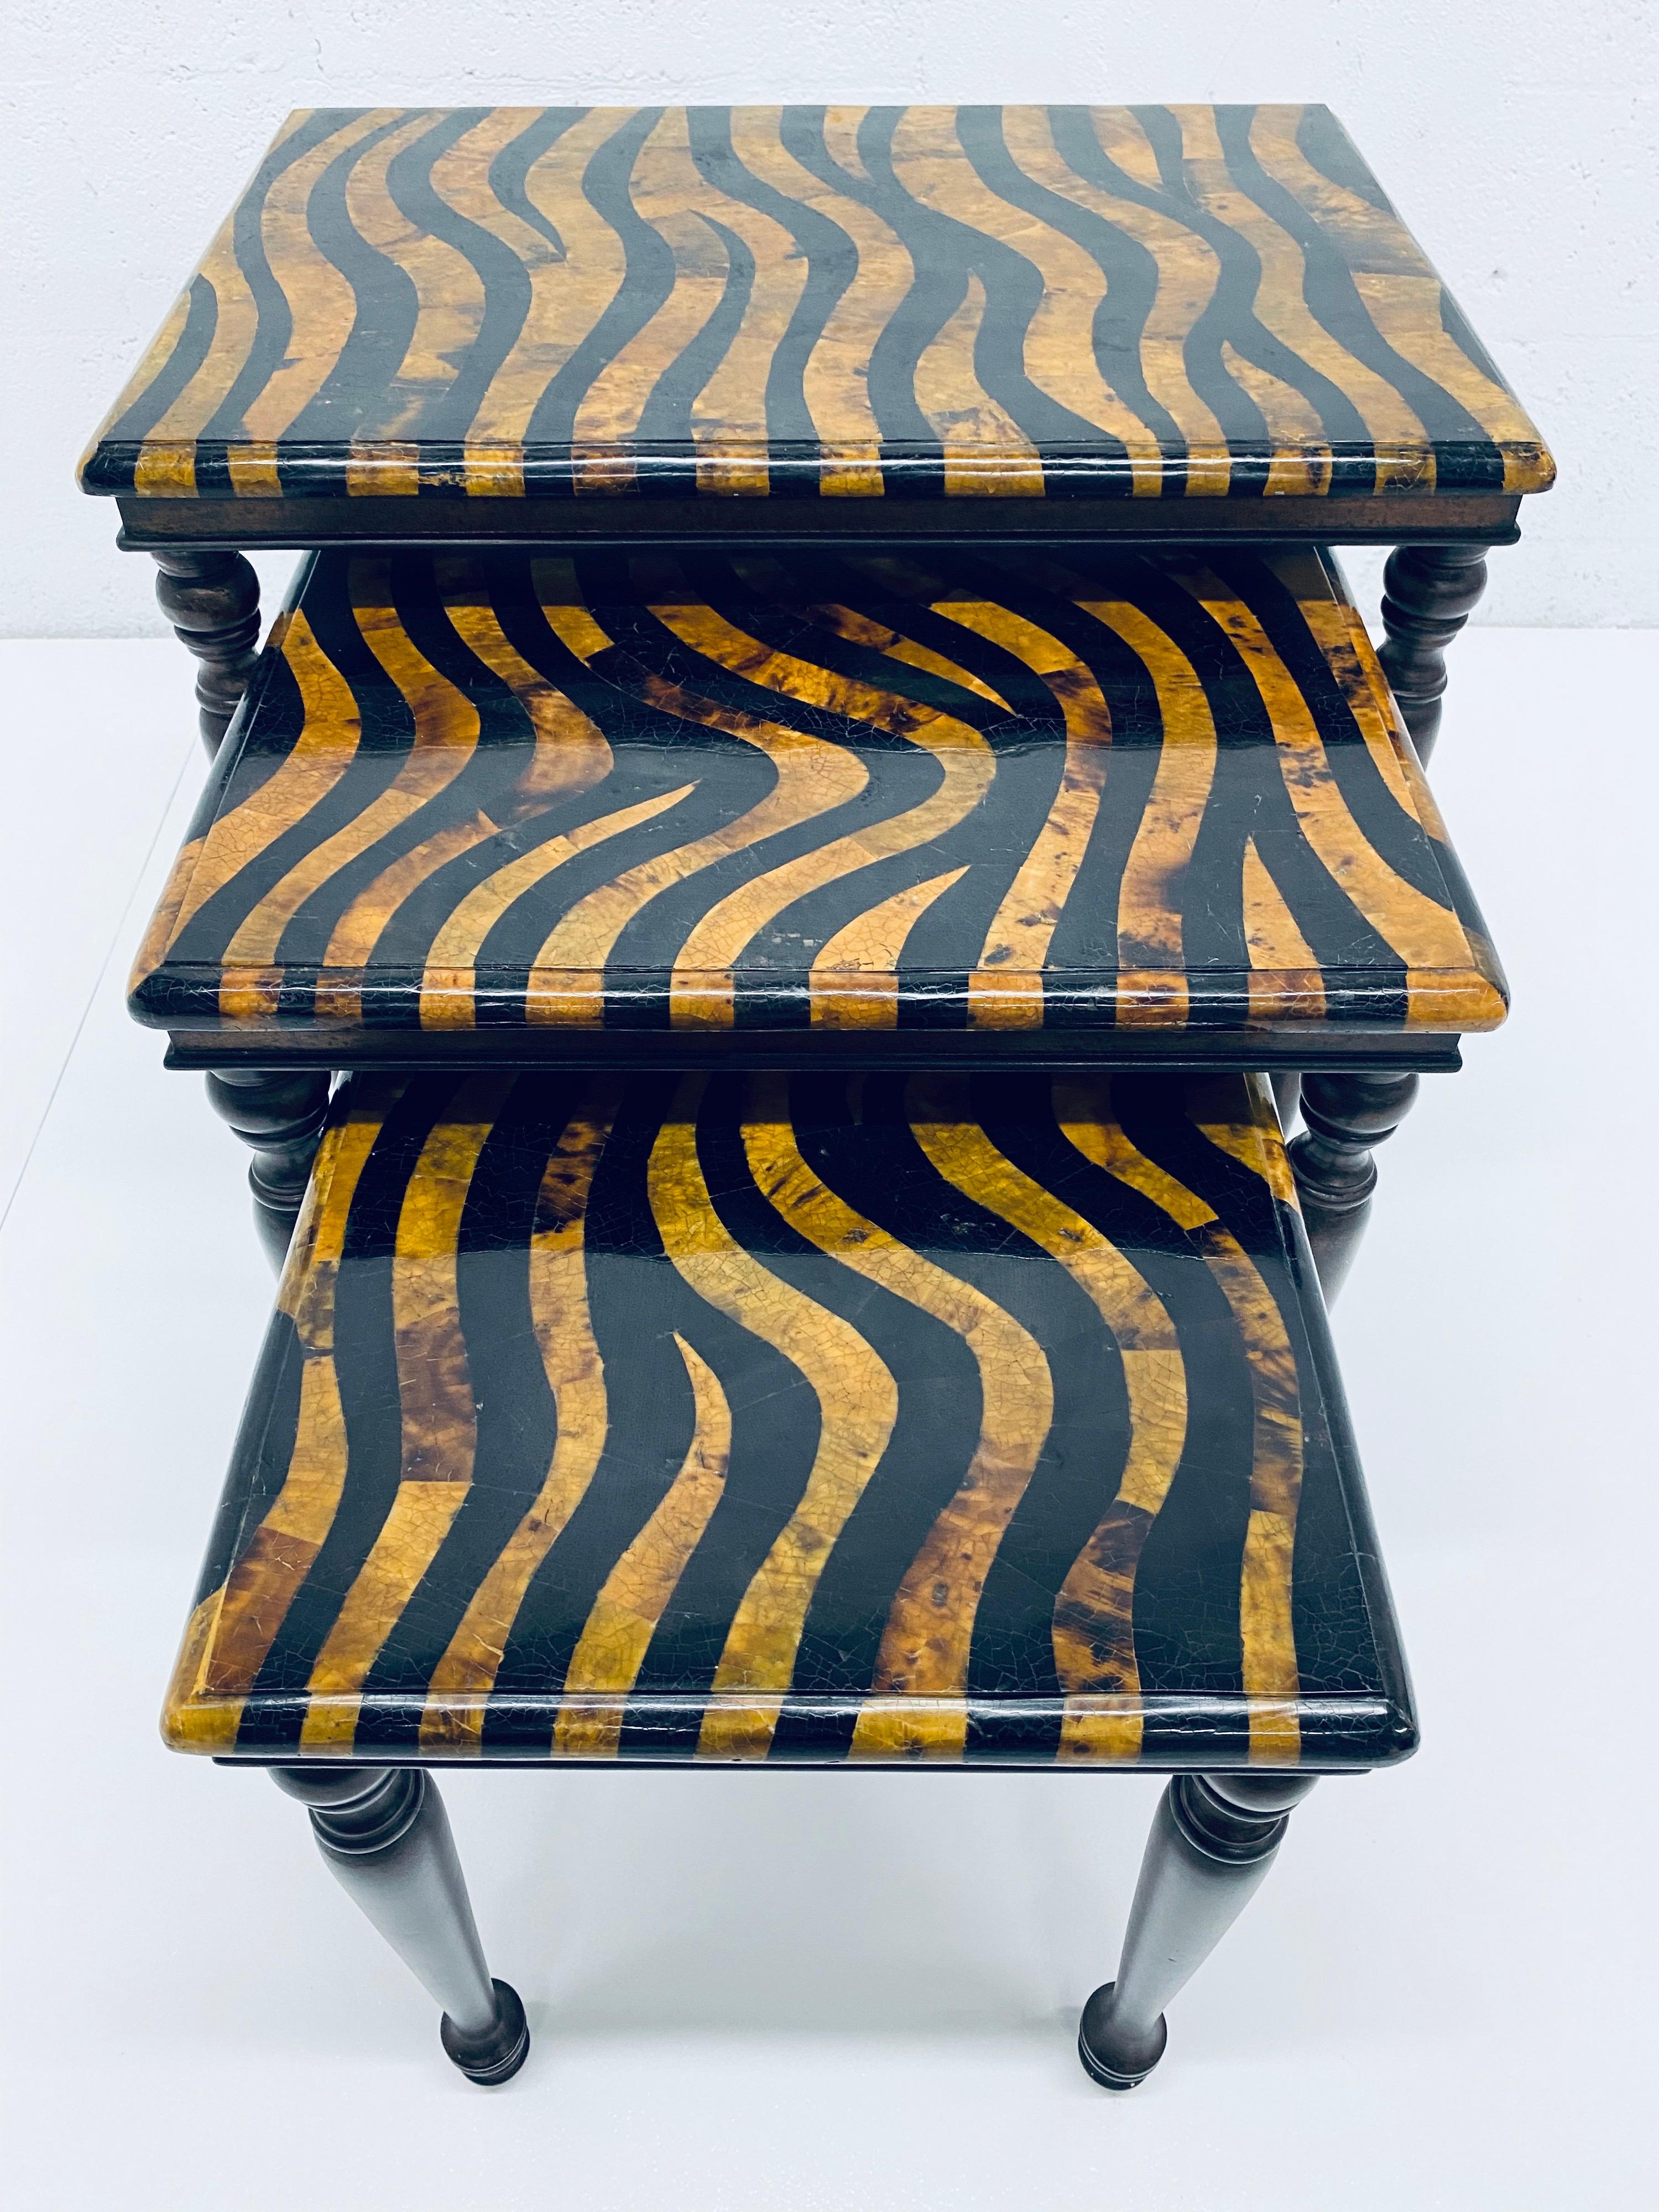 Set of three nesting tables rendered in cracked coconut shell lacquer top with Zebra motif and wood legs by Maitland-Smith.